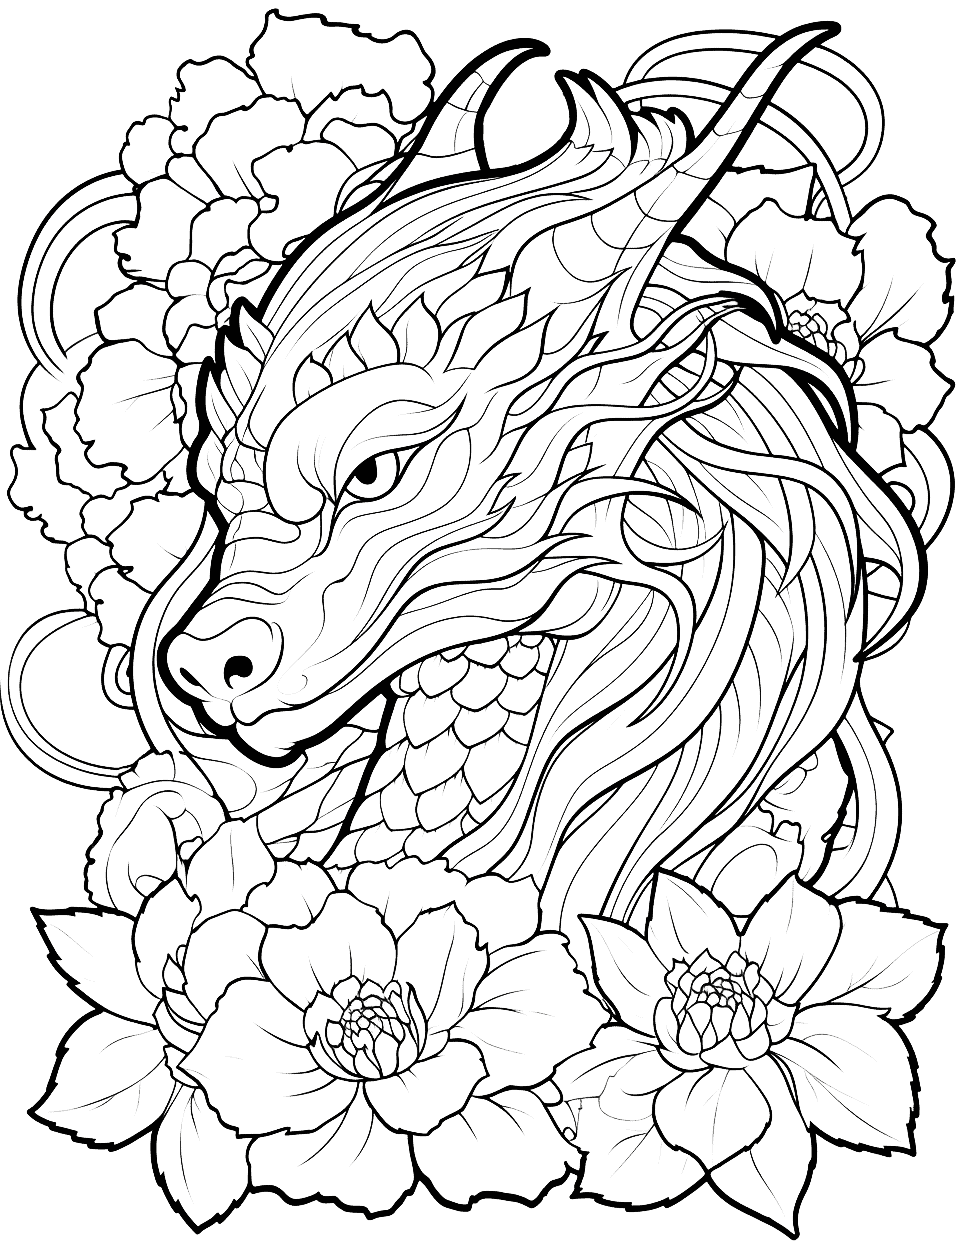 Dragon's Floral Art Adult Coloring Page - A dragon surrounded by an intricate floral design featuring a variety of flowers, leaves, and ornate details.